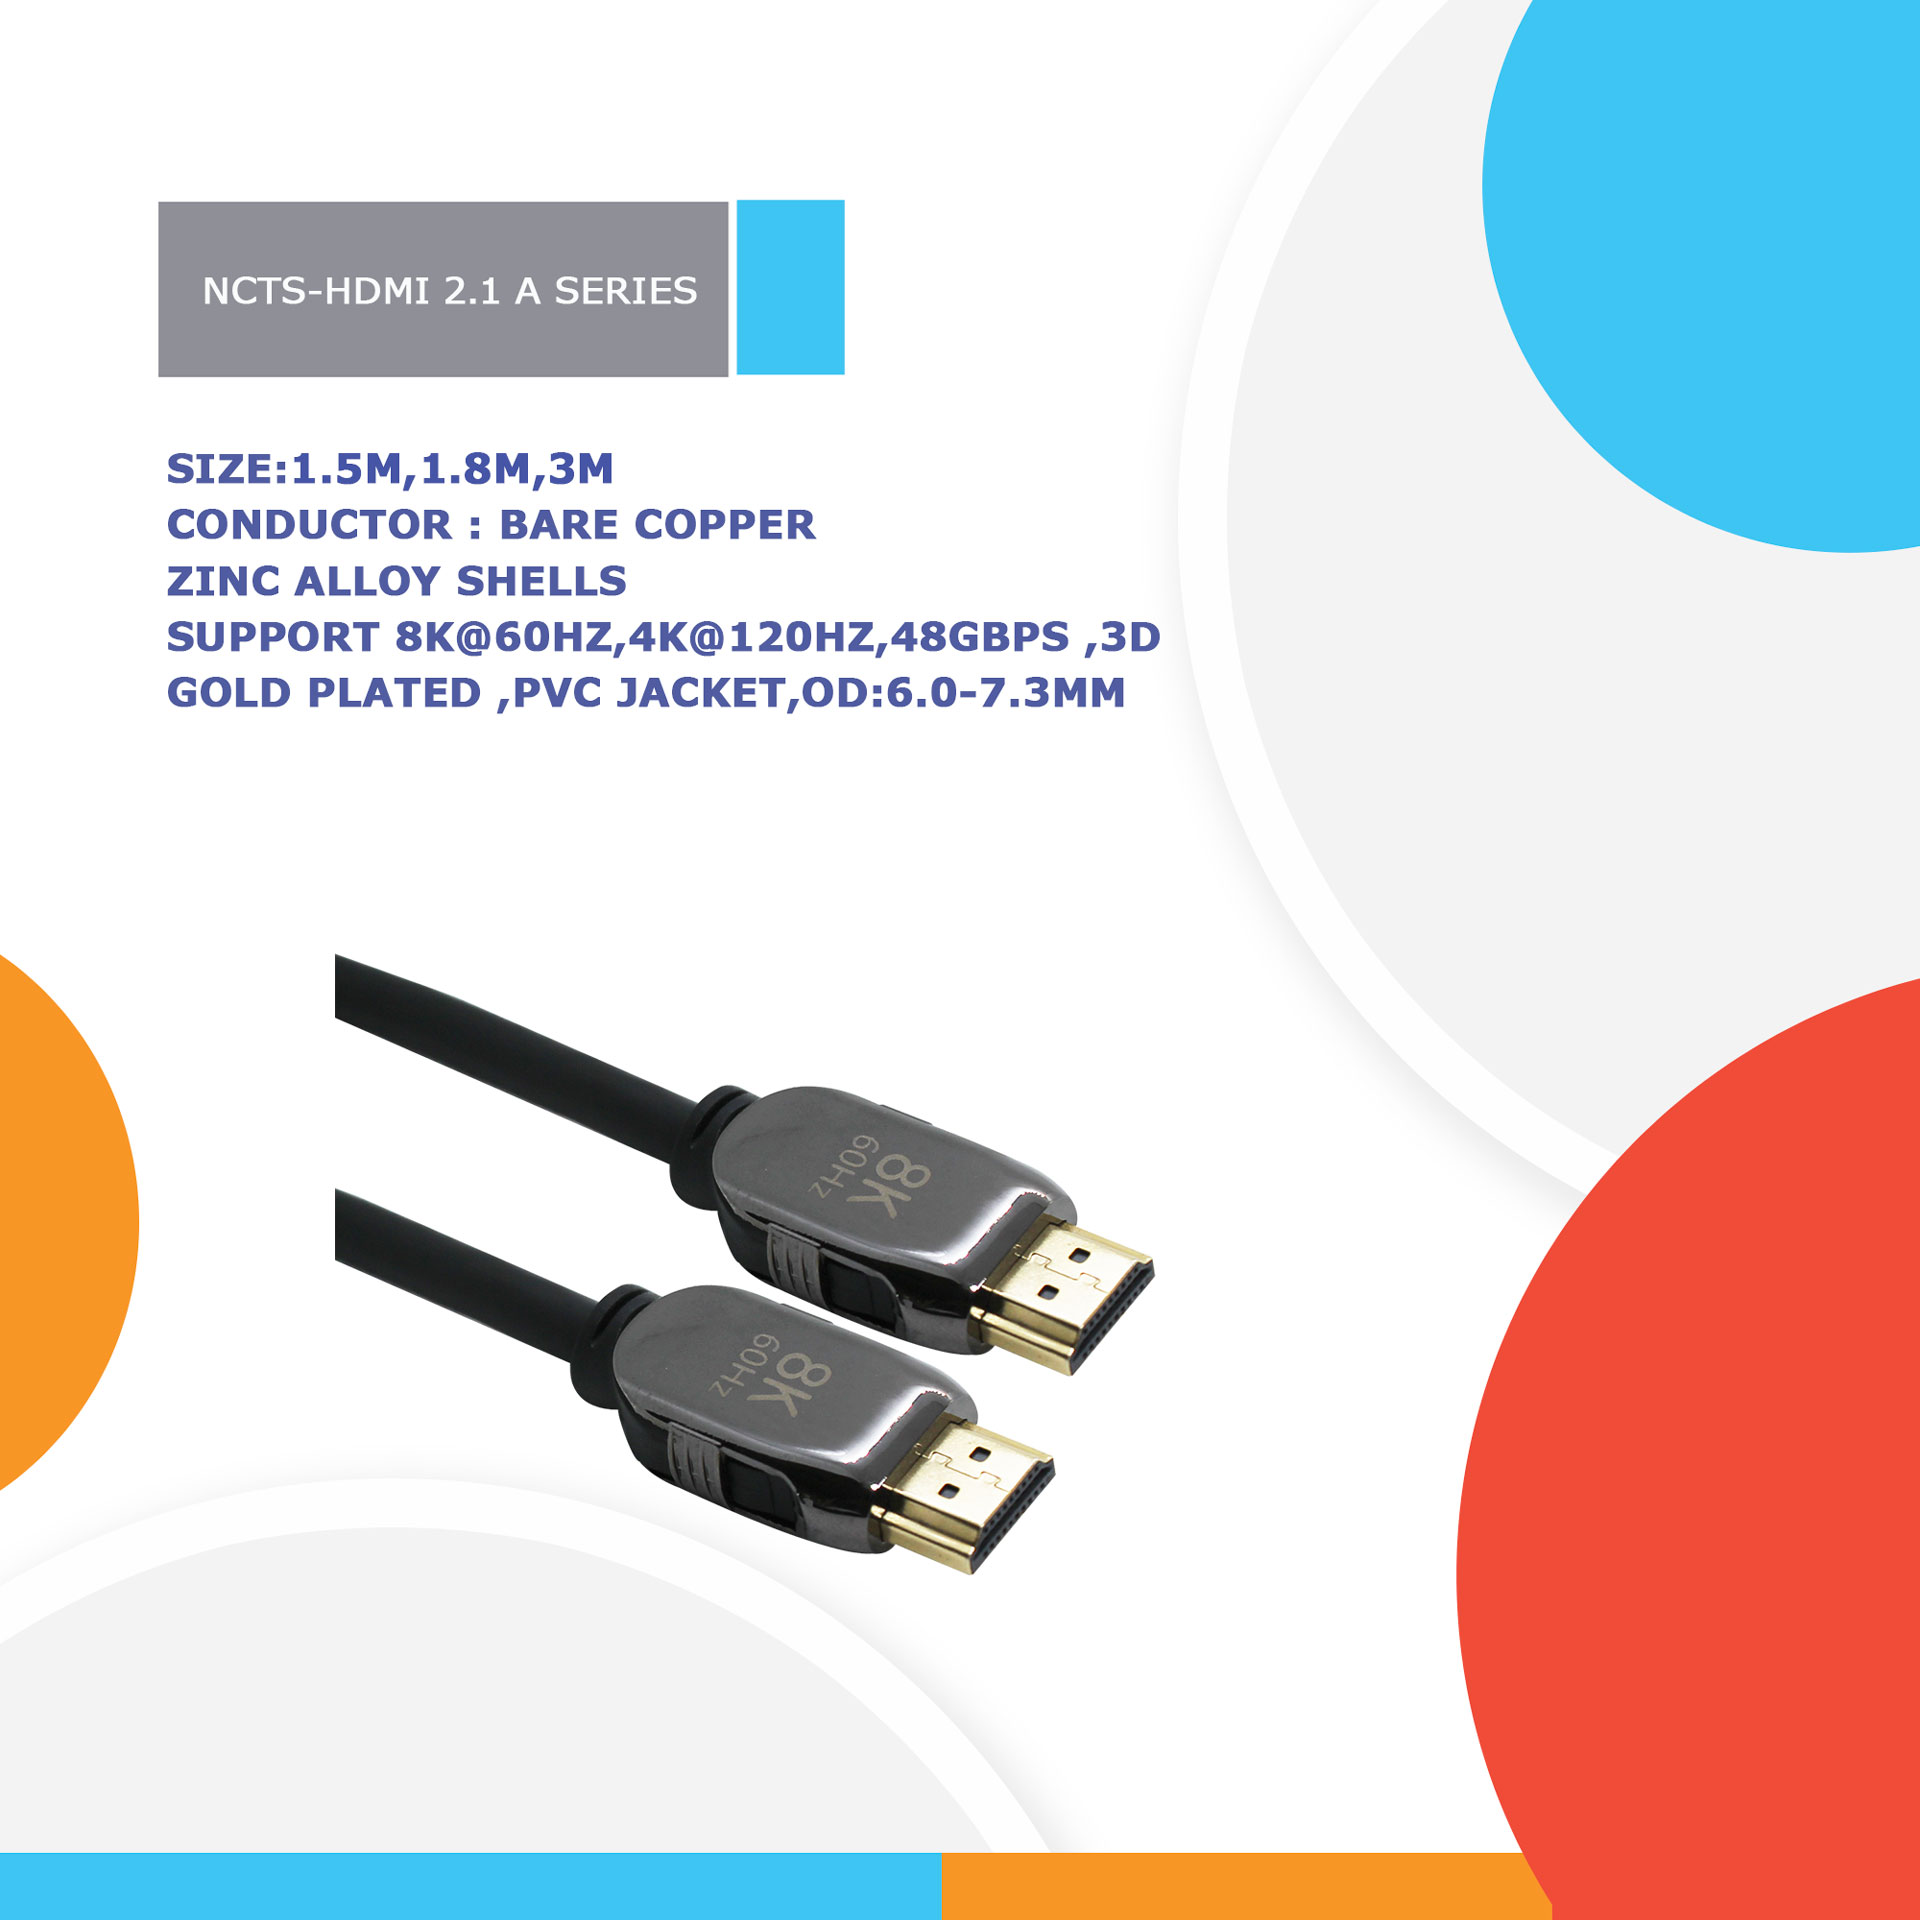 NCTS HDMI 2.1 A SERIES